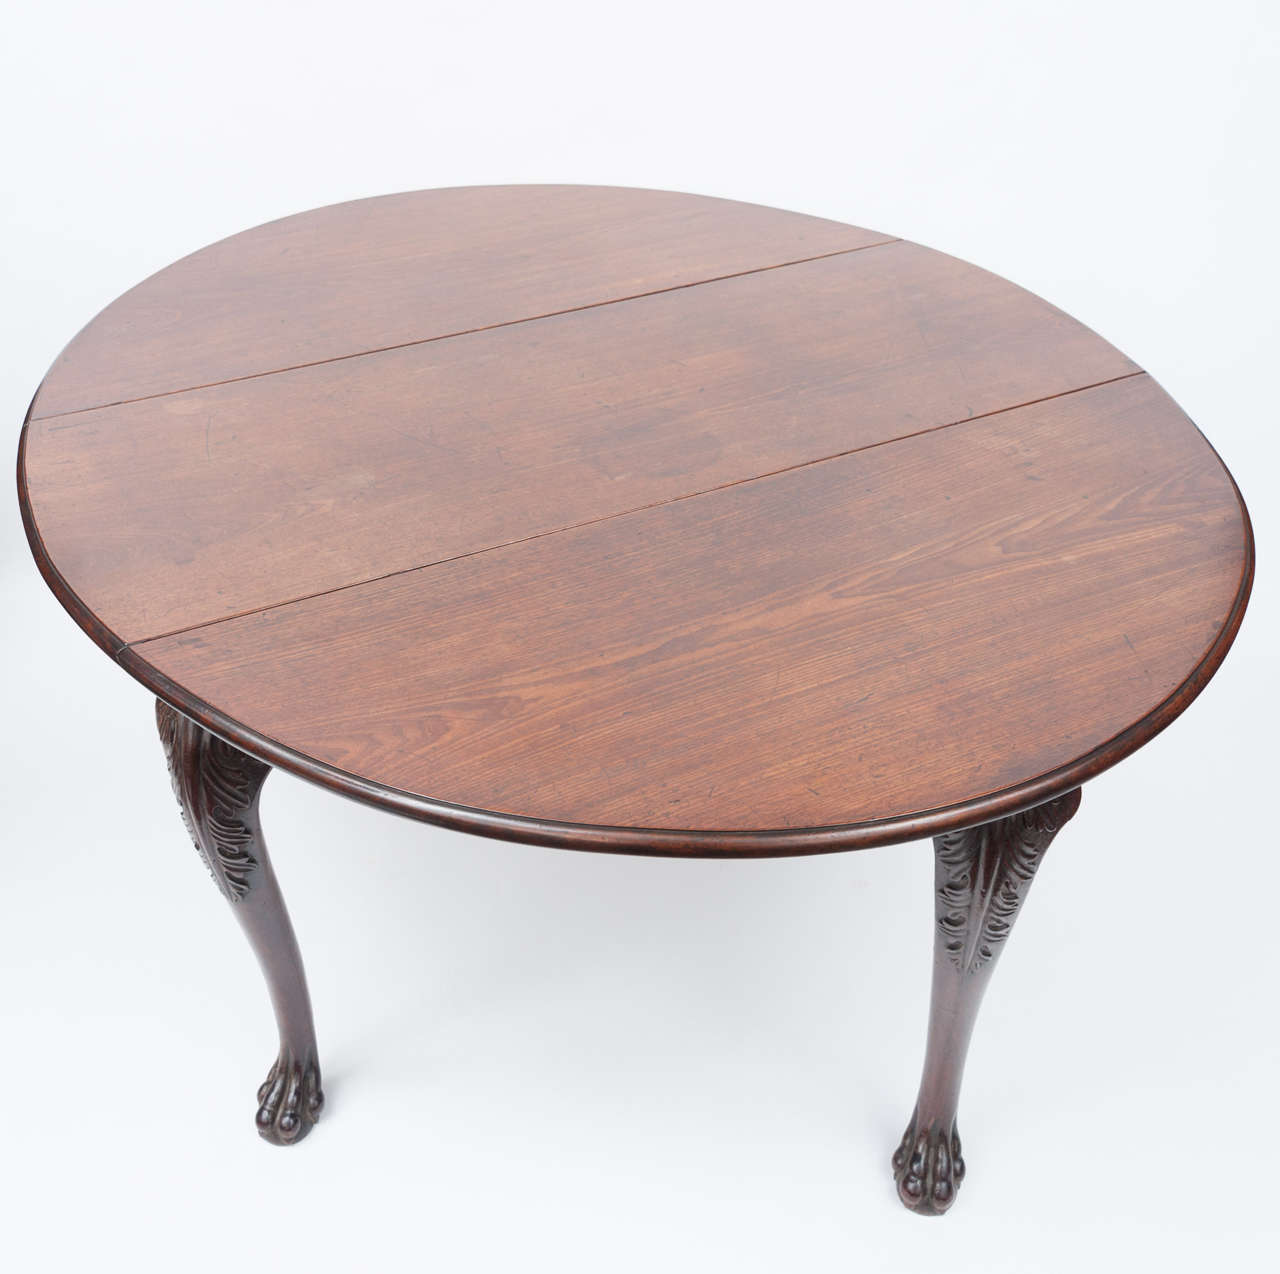 A good George II Irish mahogany drop-leaf table, with a well figured oval top with a molded edge. The ends with a shaped apron standing on four exaggerated cabriole legs with bold acanthus carving, terminating in claw feet. Great quality dense